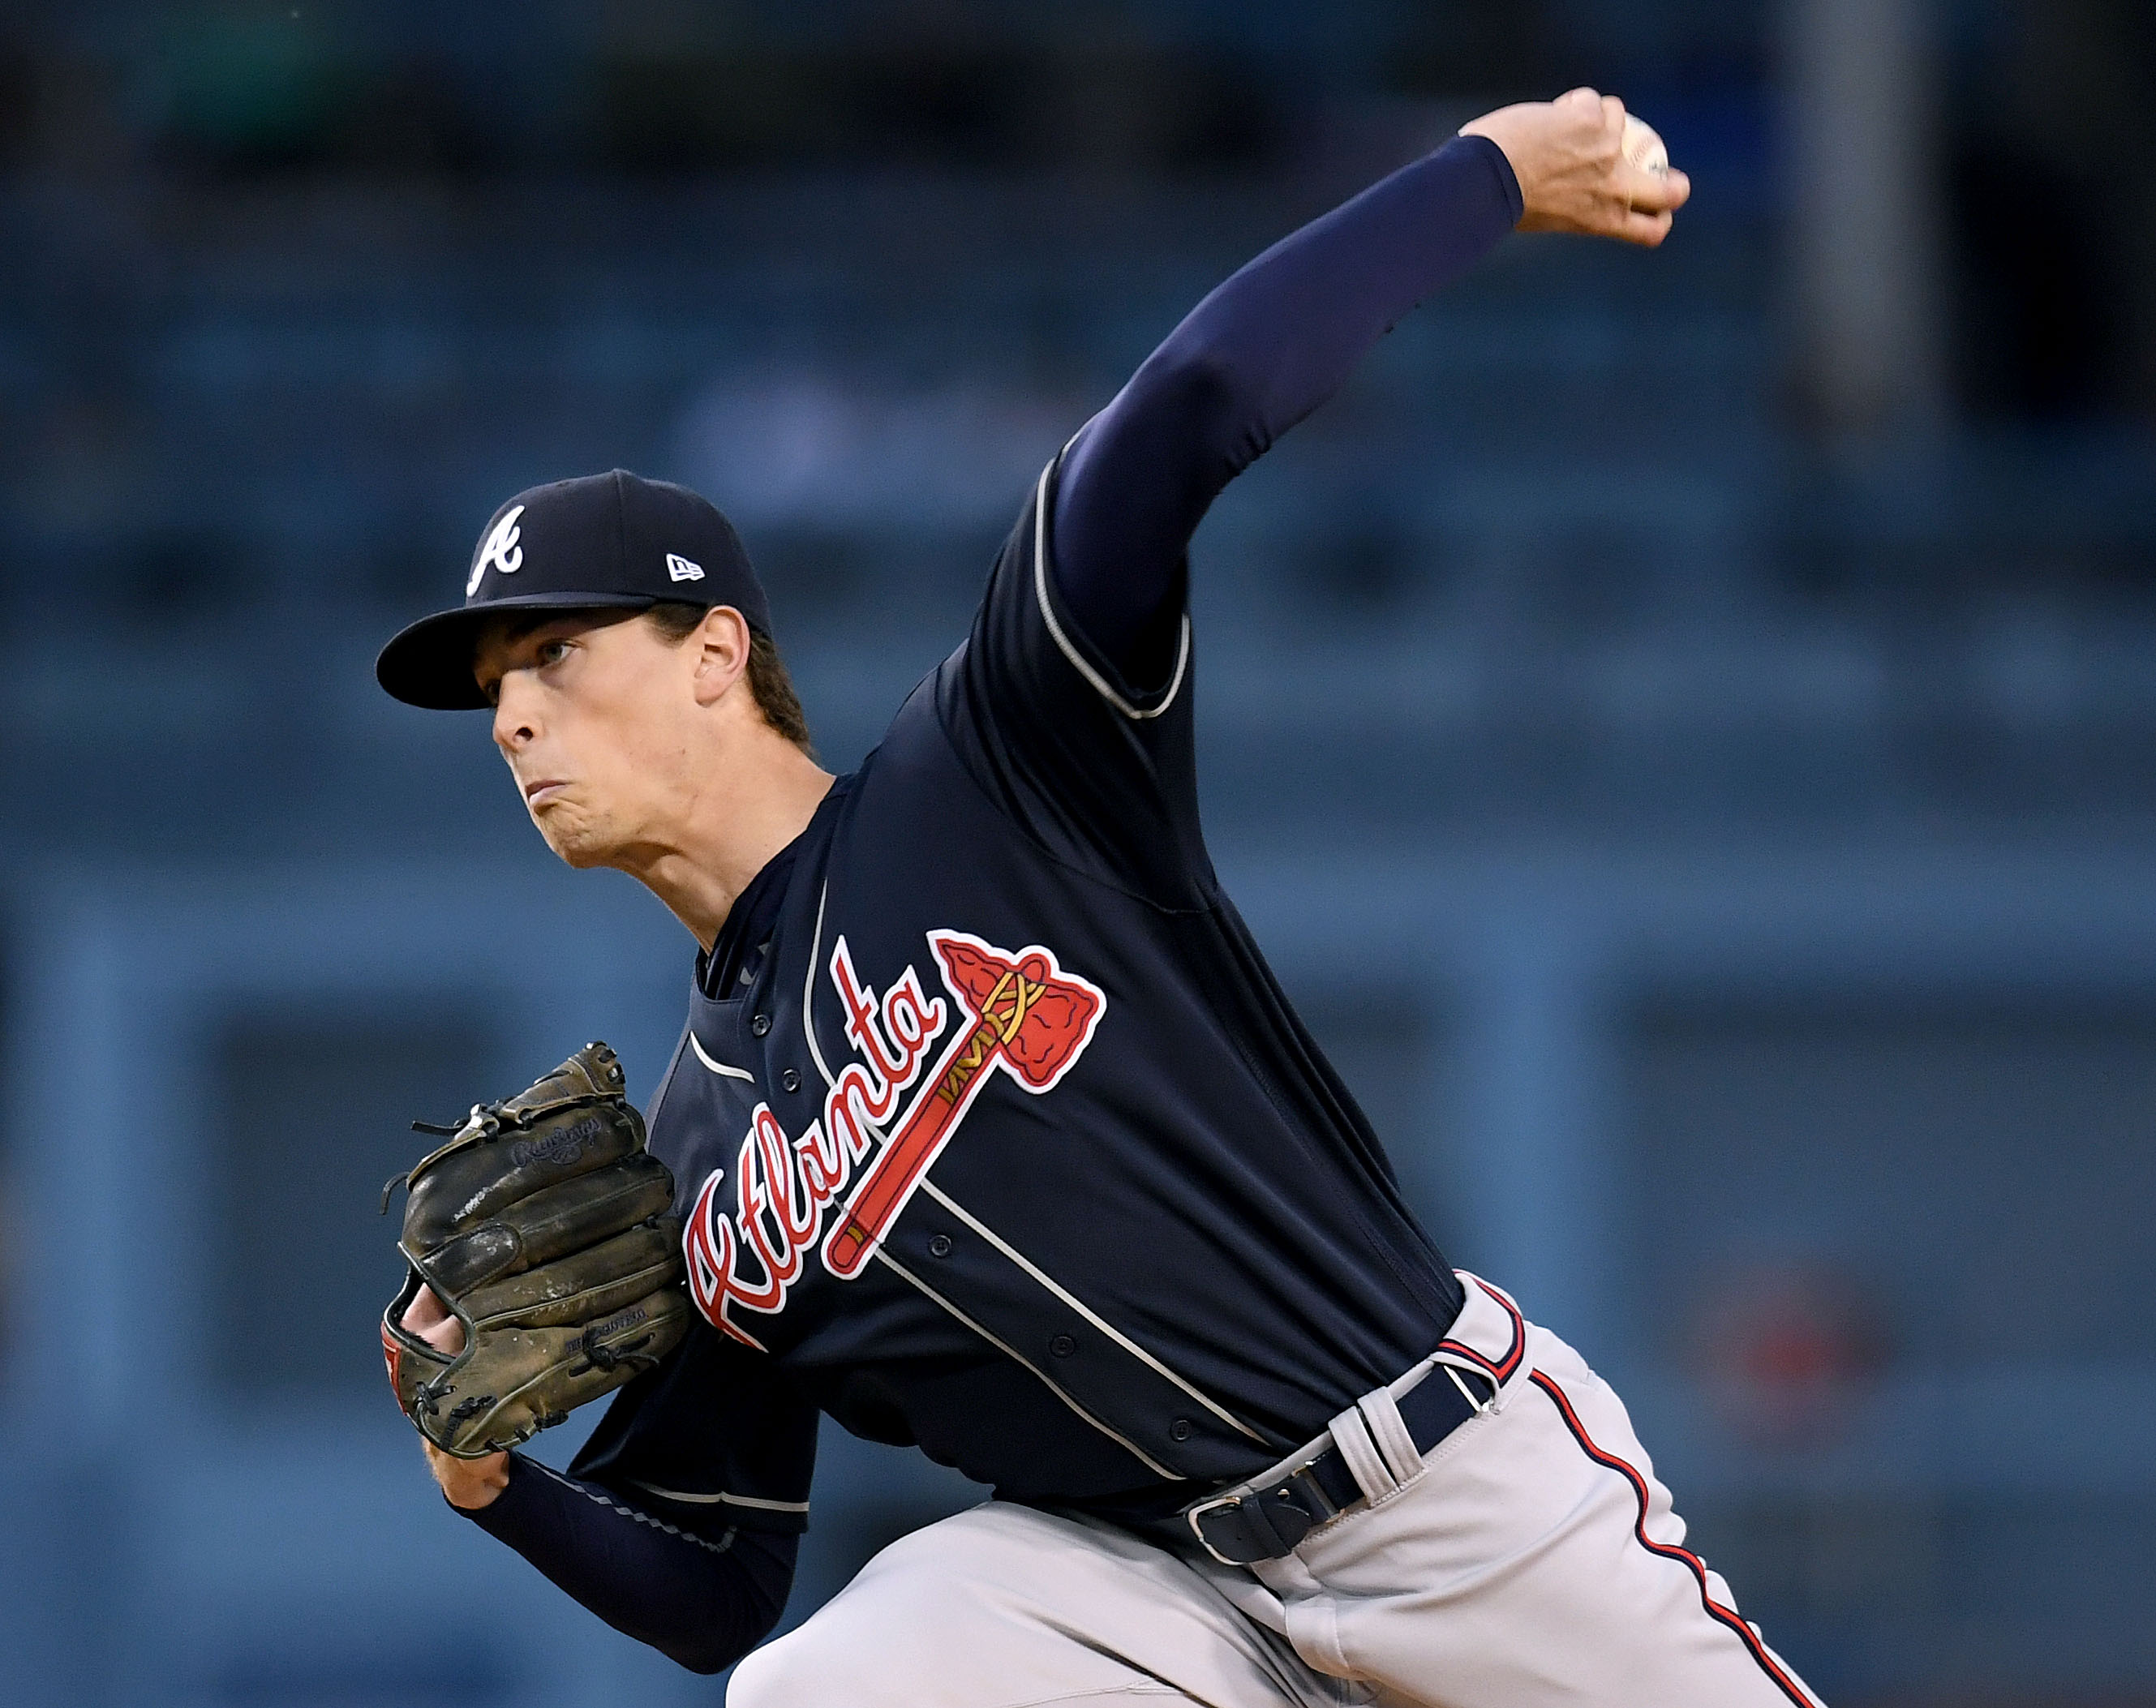 Max Fried exits after being hit by comebacker